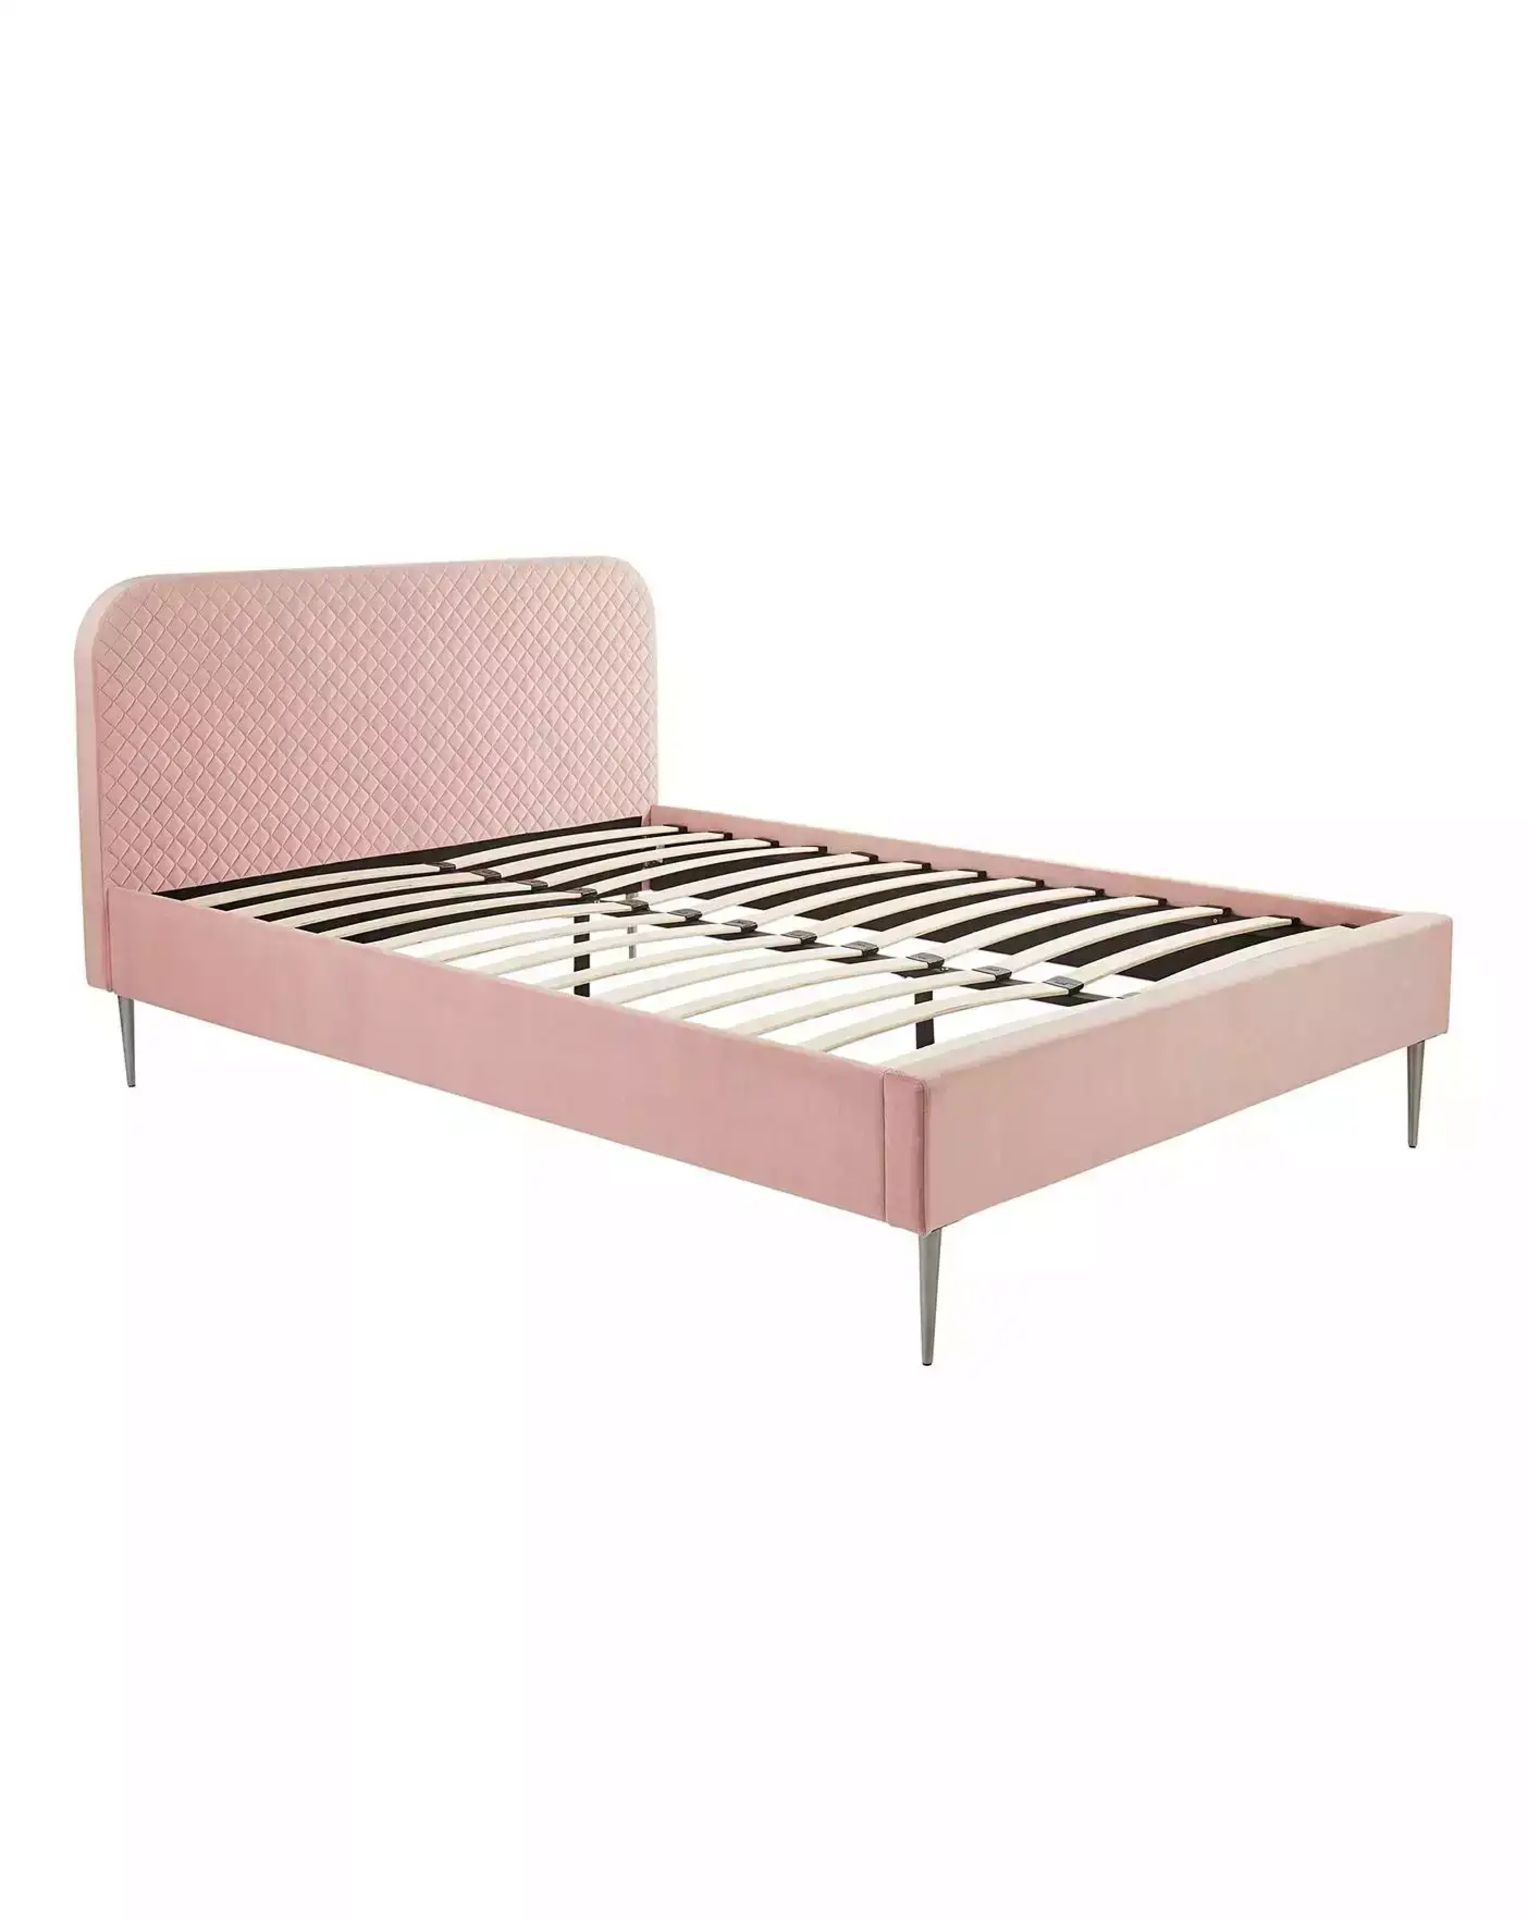 BRAND NEW ARDEN Quilted KINGSIZE Bed Frame. BLUSH. RRP £339 EACH. The Arden Quilted Bed is the - Image 2 of 2